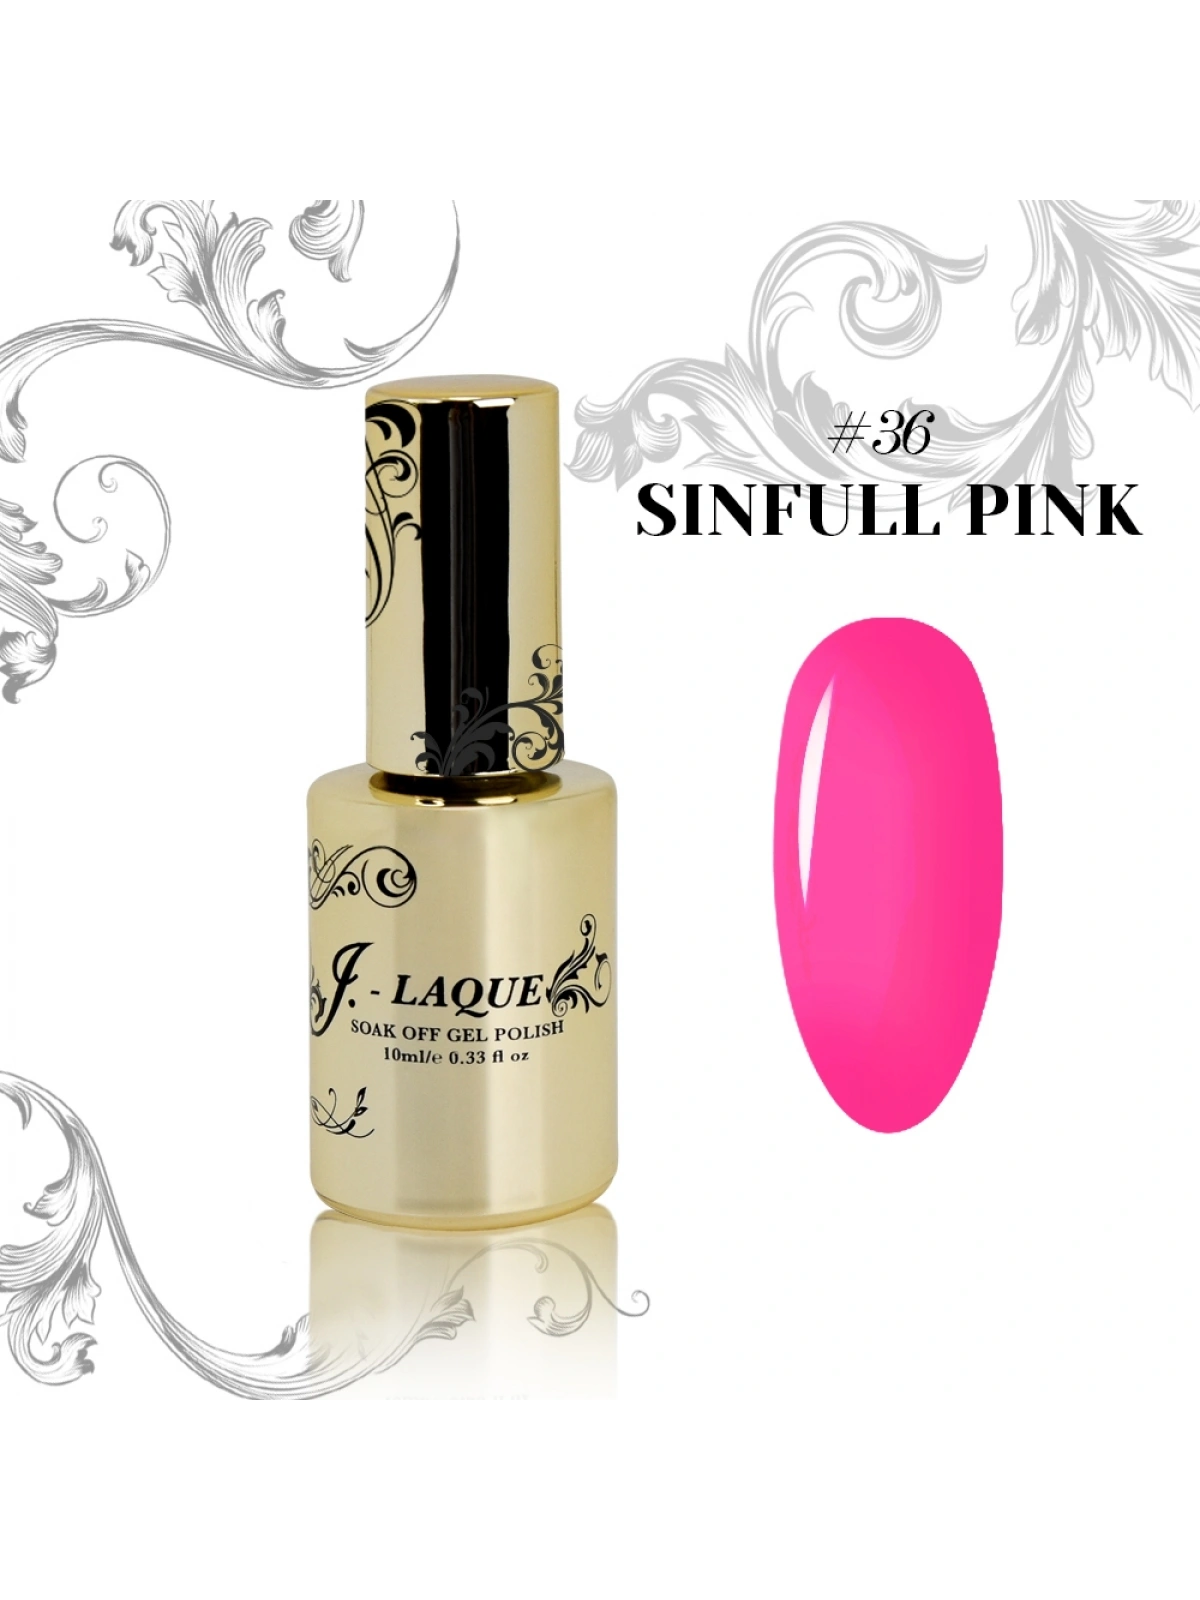 J.-Laque 36 Sinfull pink 10ml